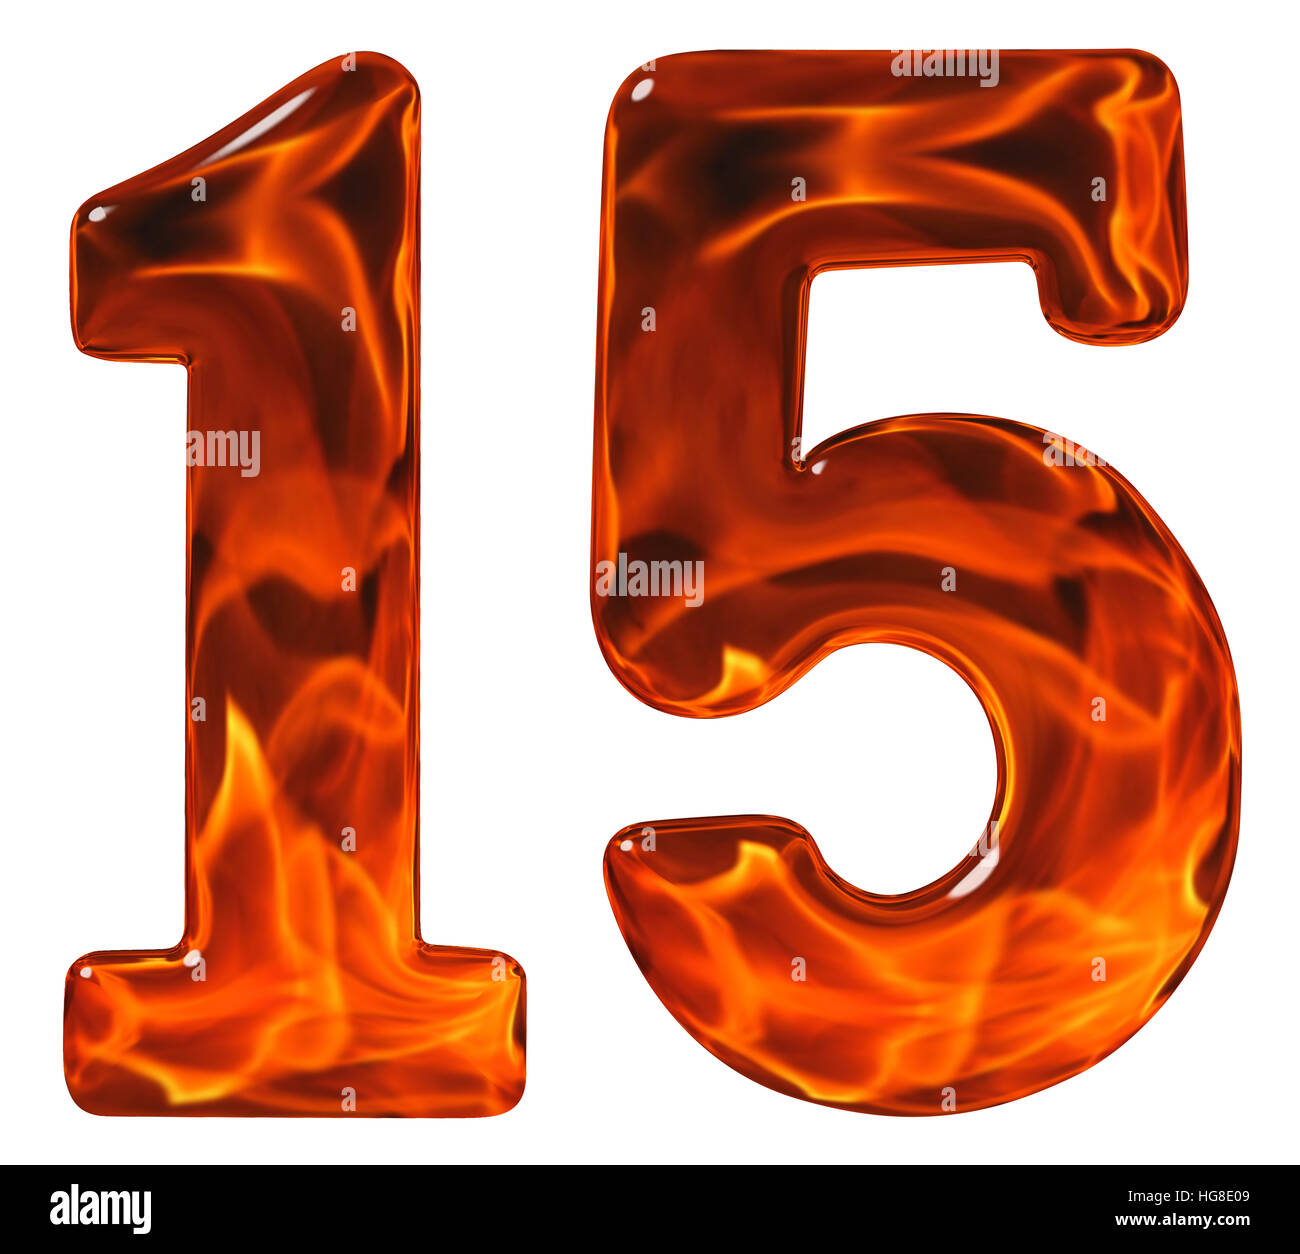 https://c8.alamy.com/comp/HG8E09/15-fifteen-numeral-from-glass-with-an-abstract-pattern-of-a-flaming-HG8E09.jpg